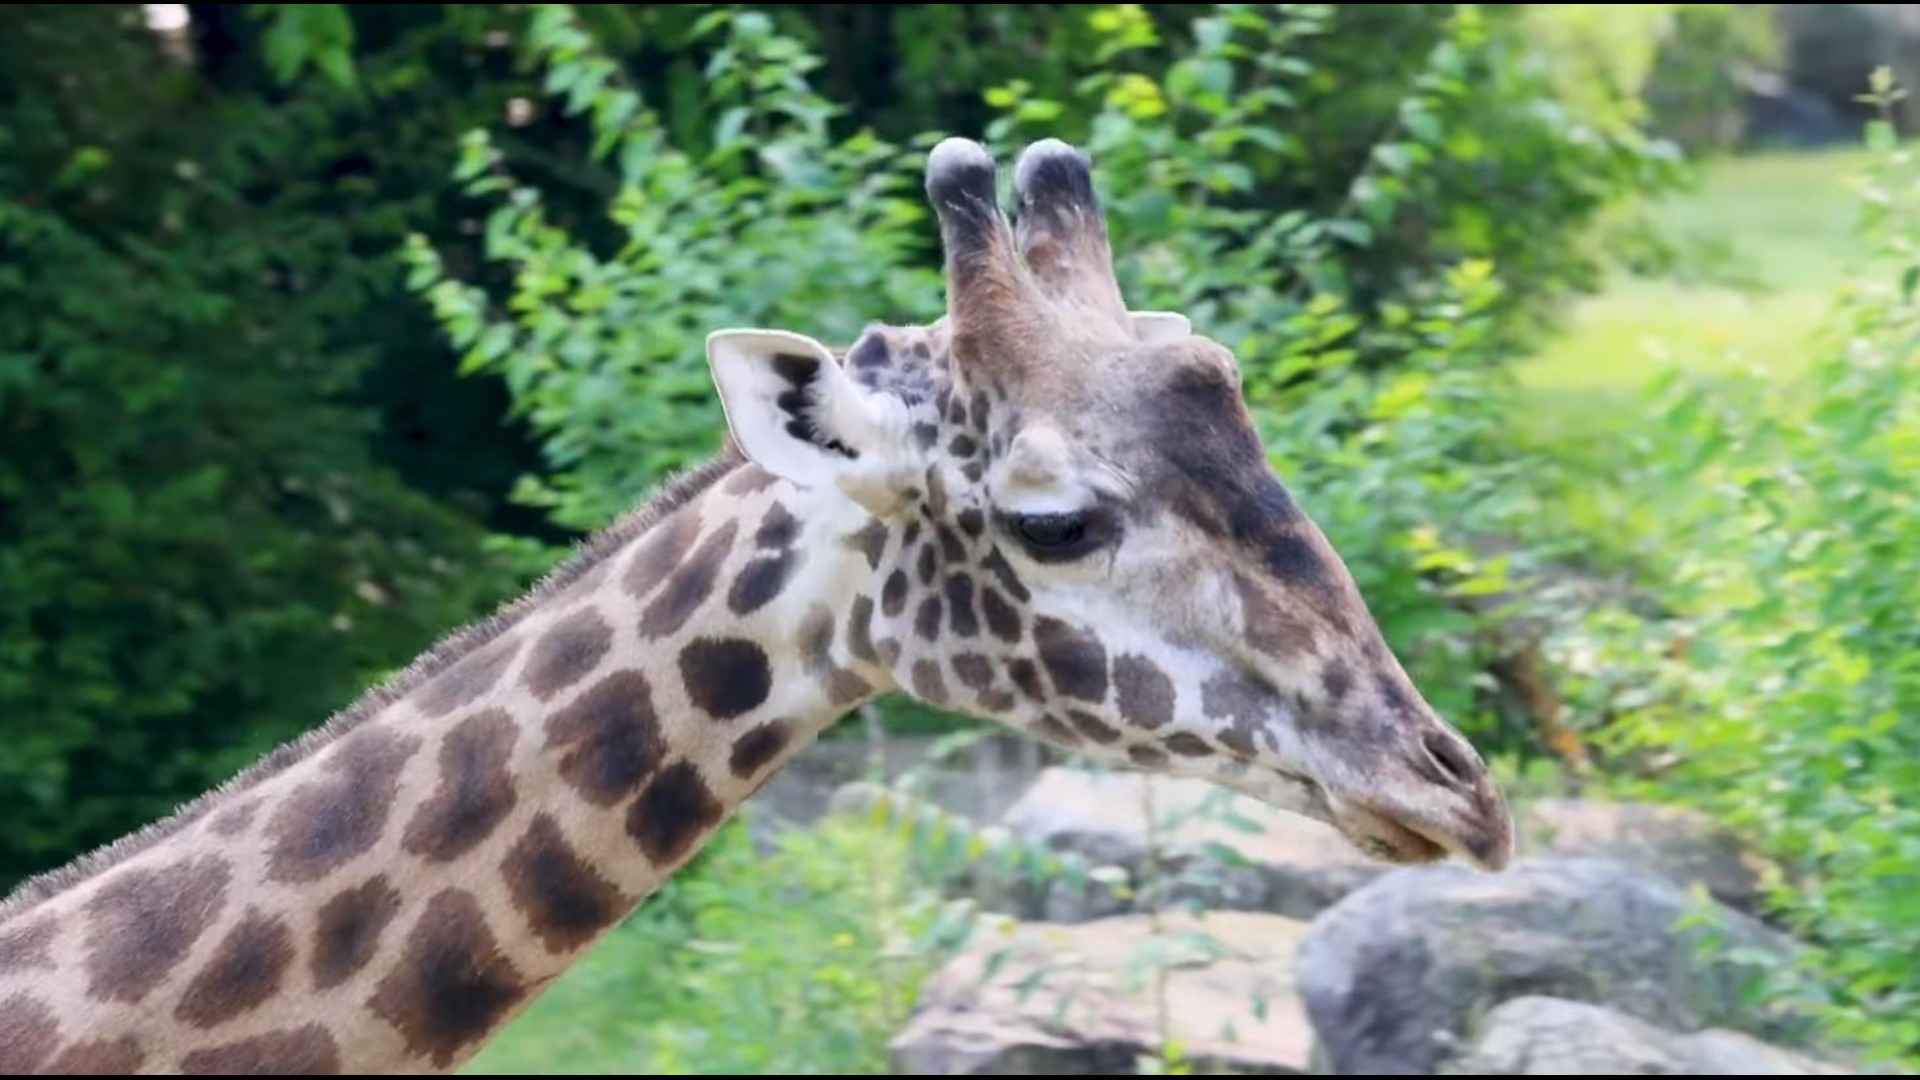 Standing at approximately 16 feet tall, Rocket is now the tallest giraffe at the Cleveland Zoo – and officials say he’s still growing.